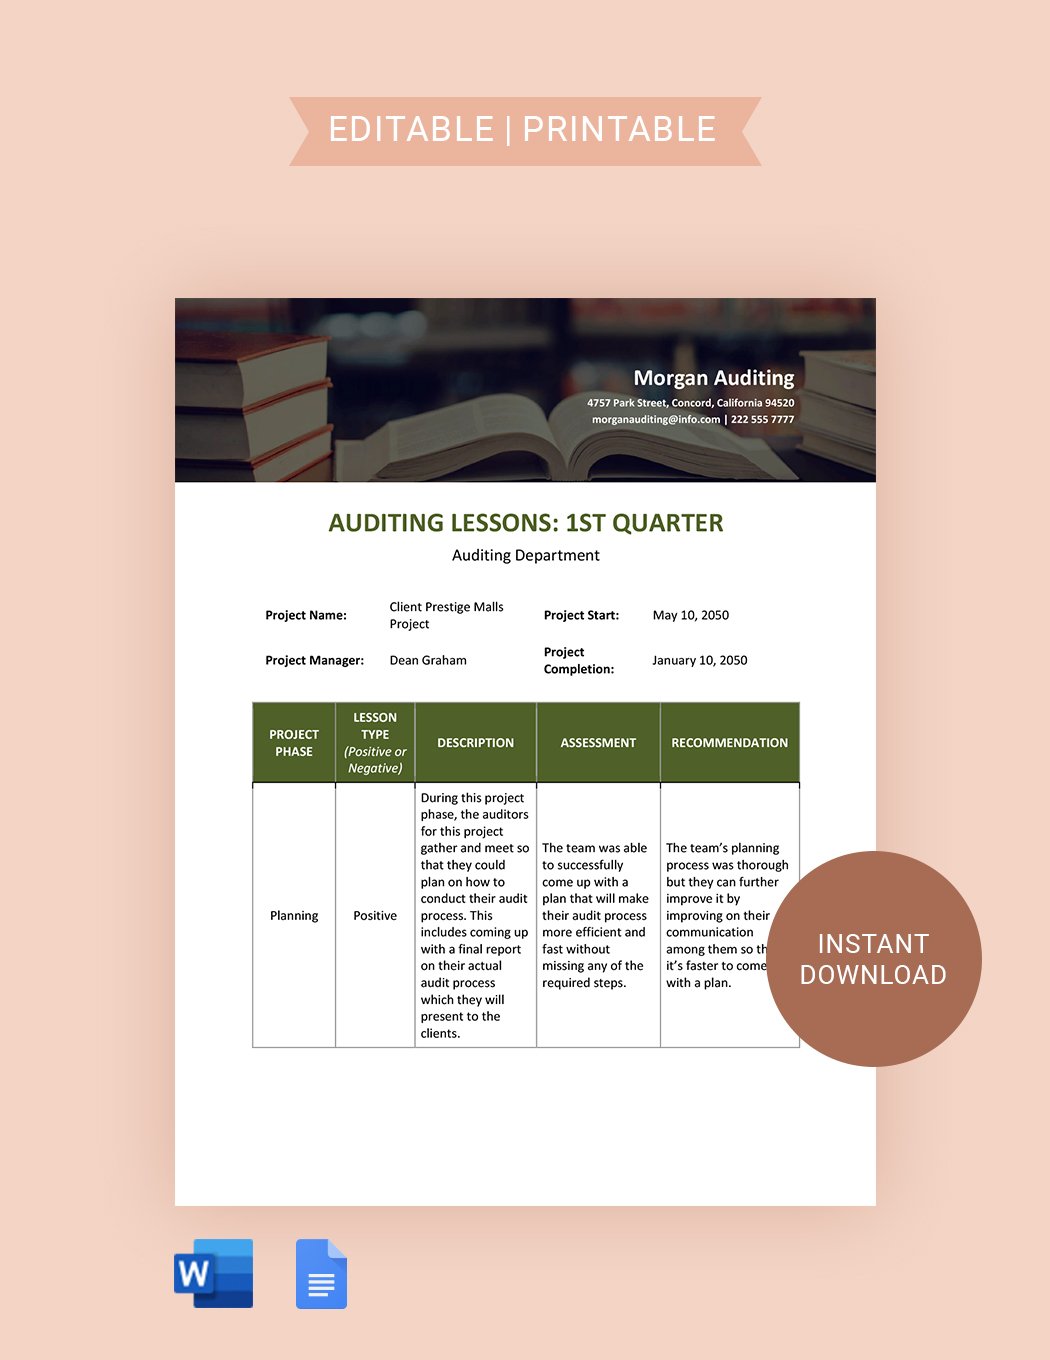 Audit Lessons Learned Template